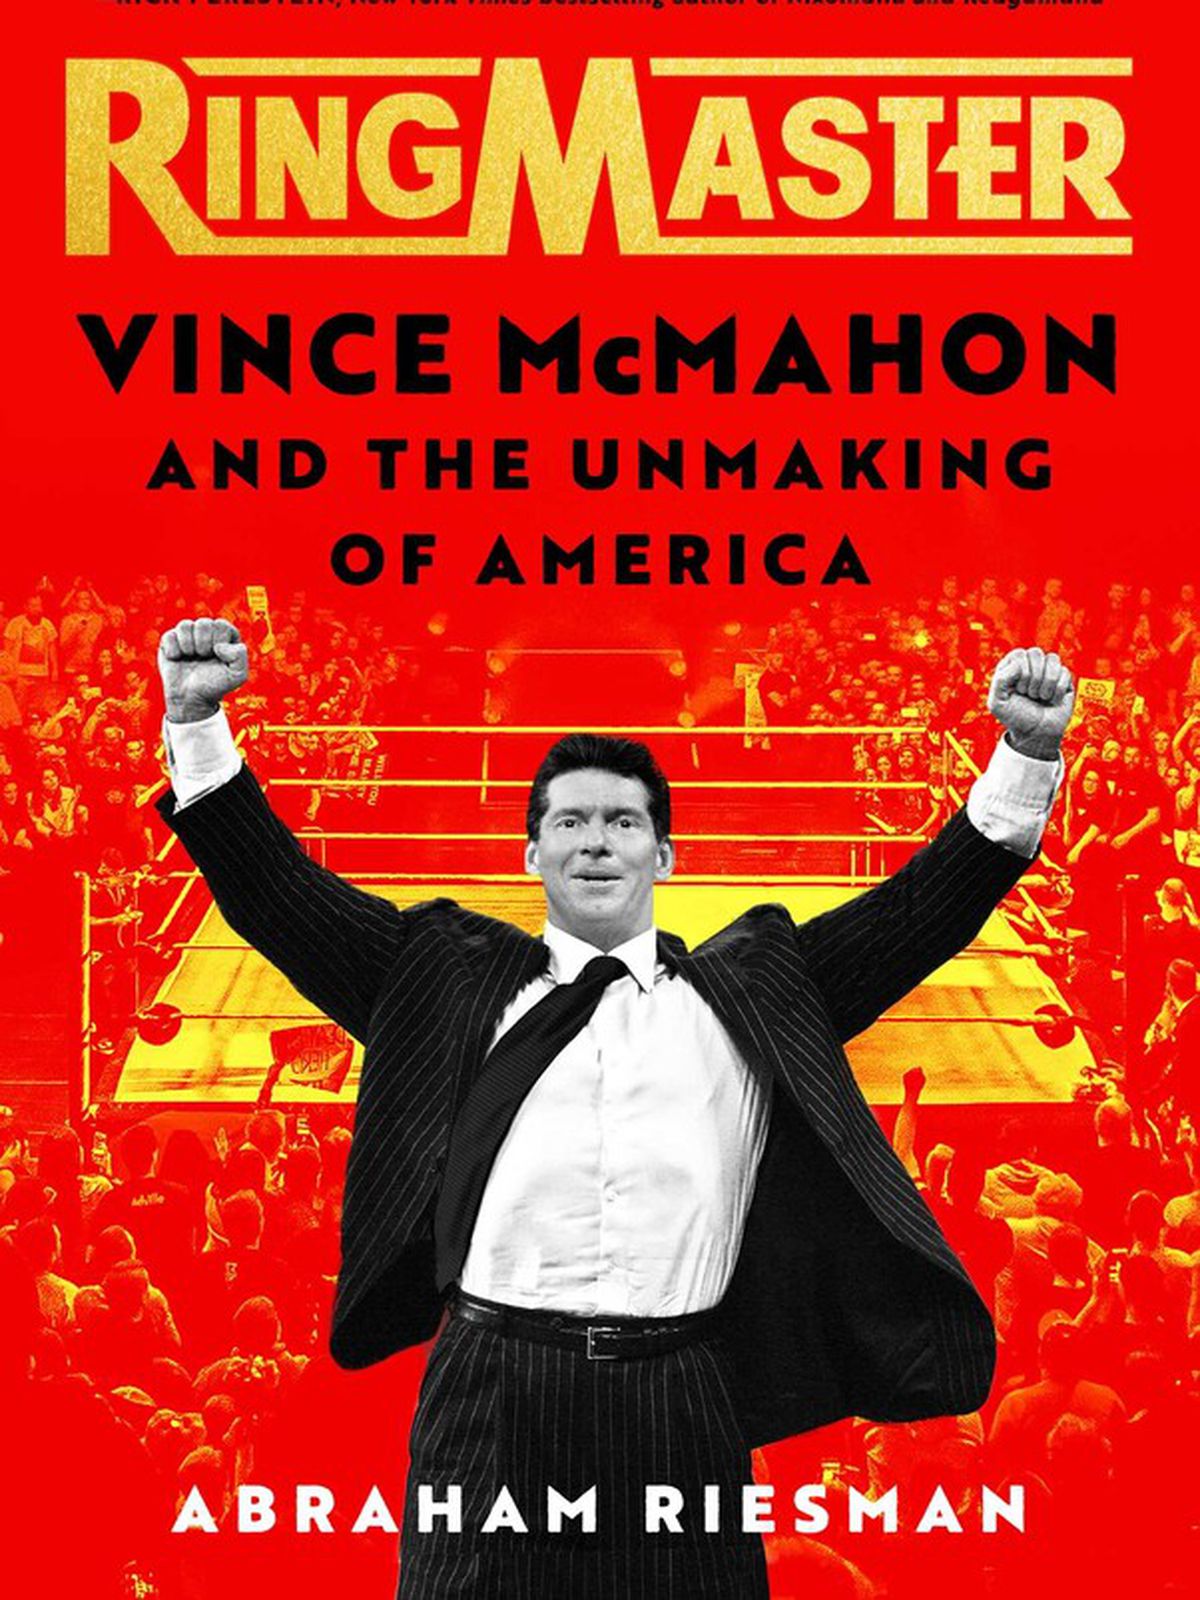 Vince McMahon holding up his arms in front of the wrestling ring on the cover for Ringmaster: Vince McMahon and the Unmaking of America